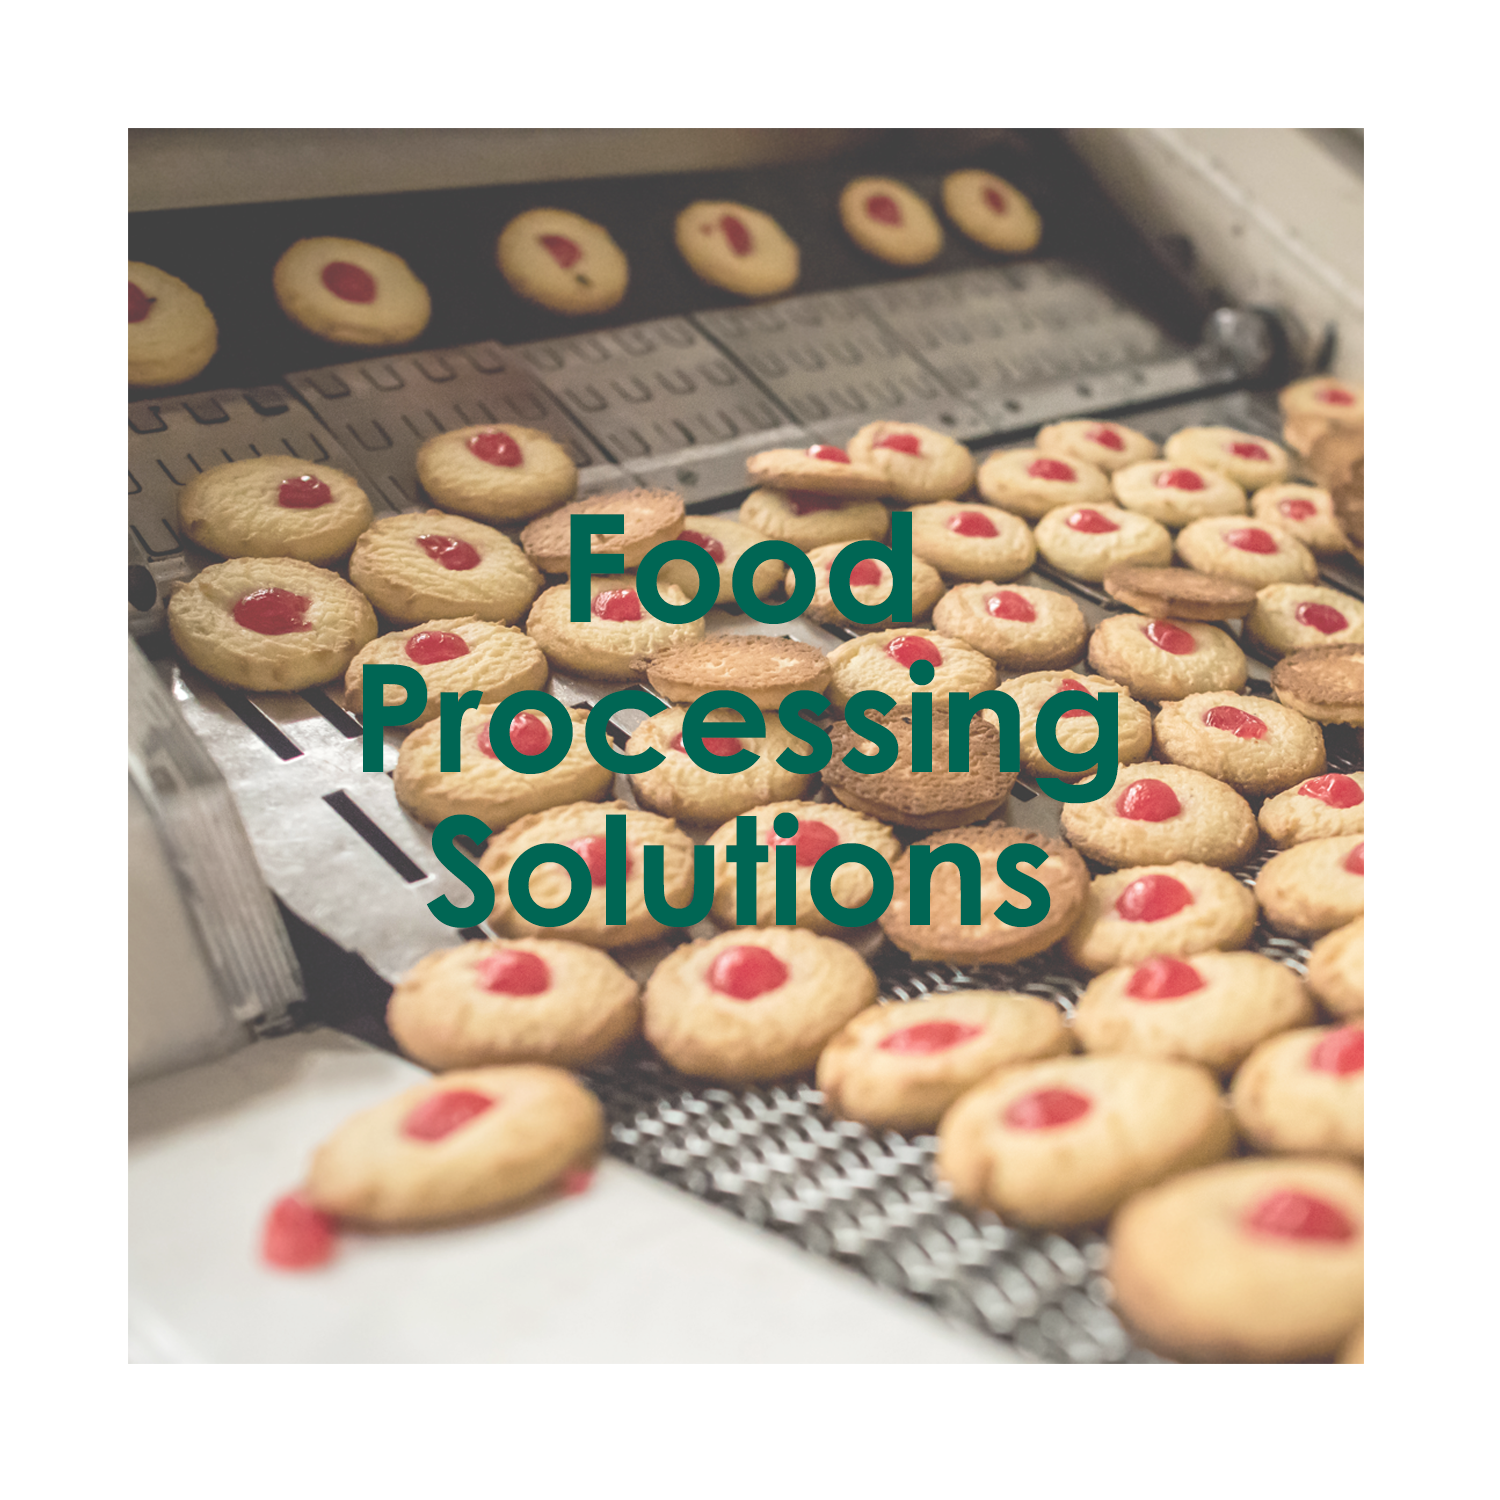 Food Processing Solutions